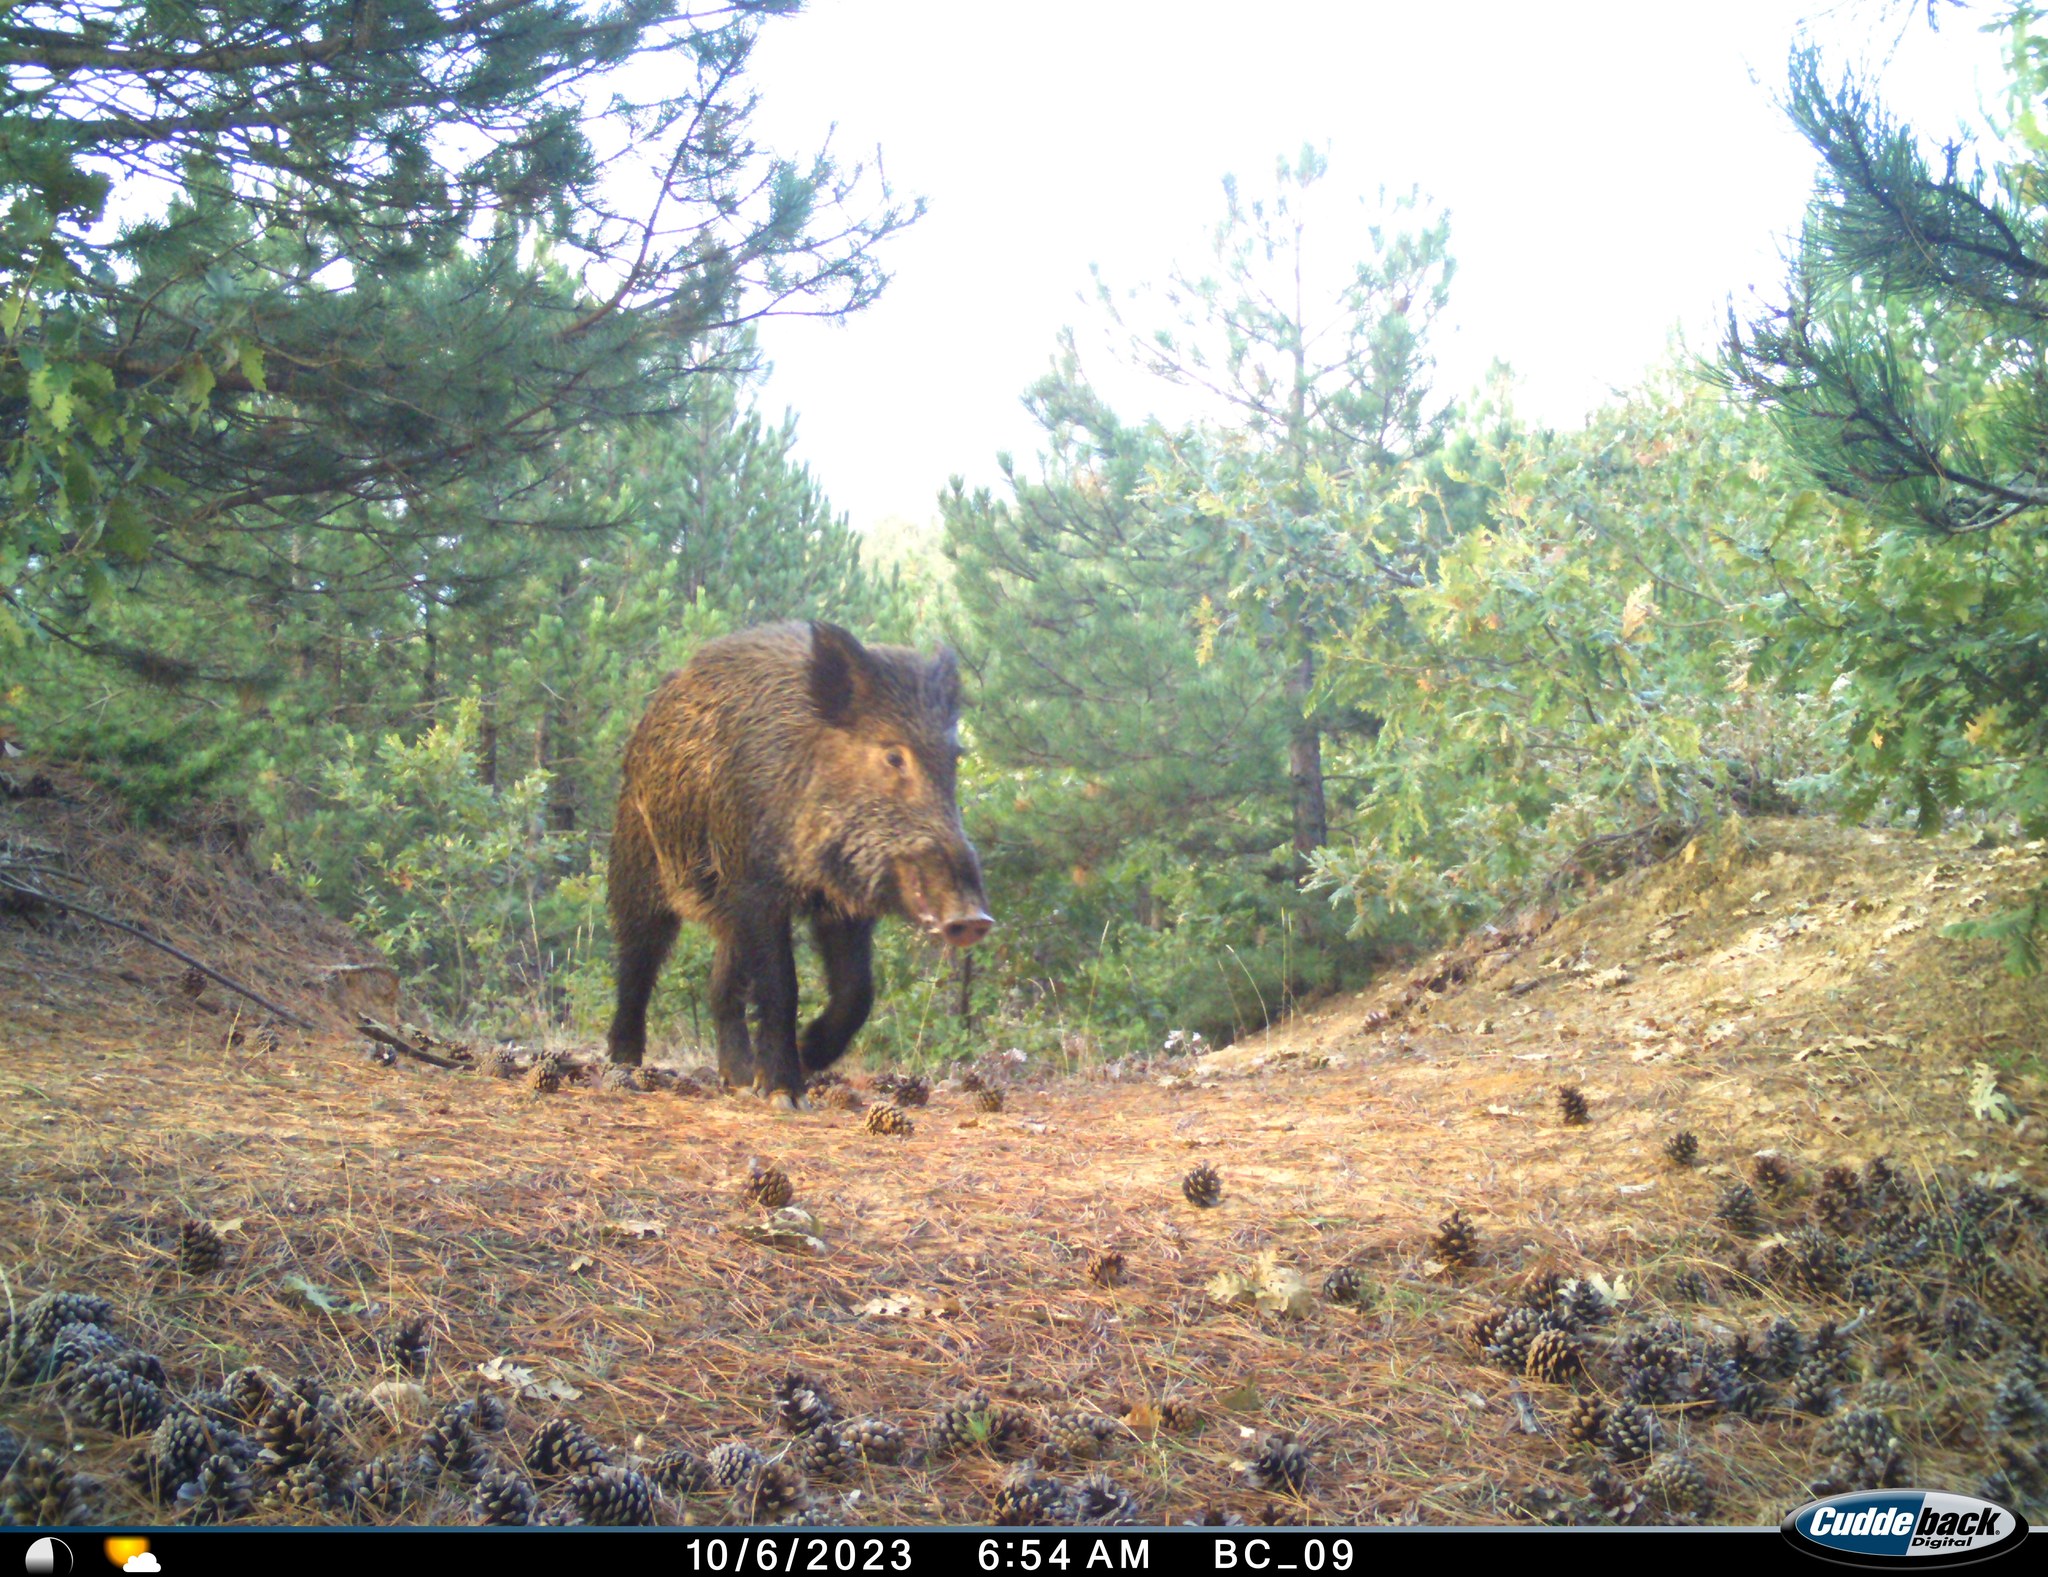 Wrapping up an exciting third year of the camera trap monitoring!